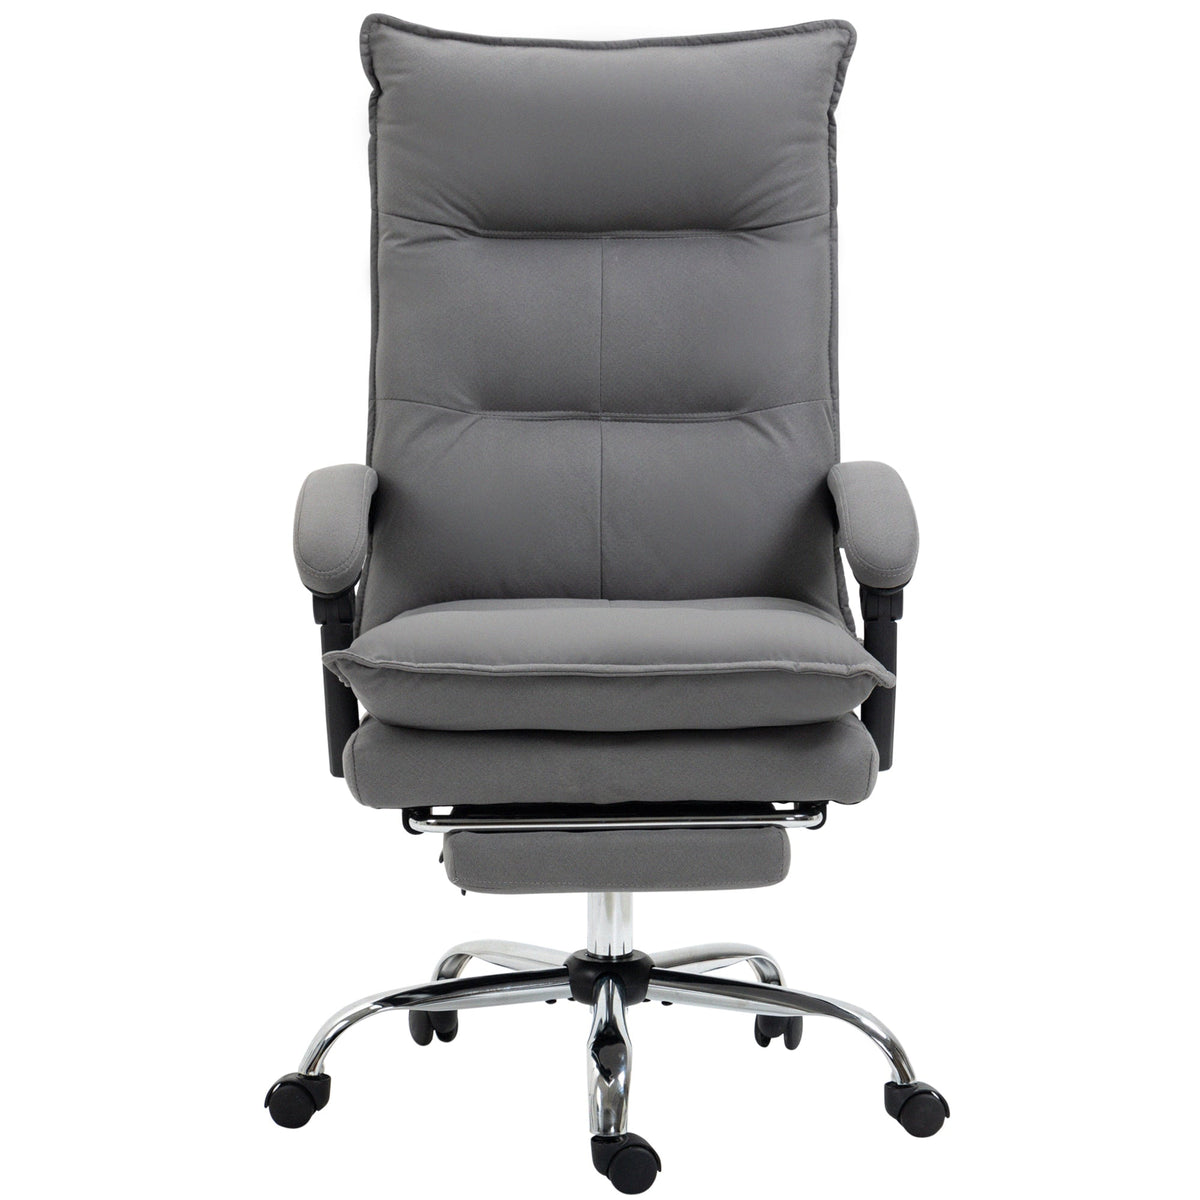 Vinsetto Microfibre Office Chair with Vibration Massage, Heat, Reclining Back, Footrest, Armrest, Double Padding, Grey - TovaHaus